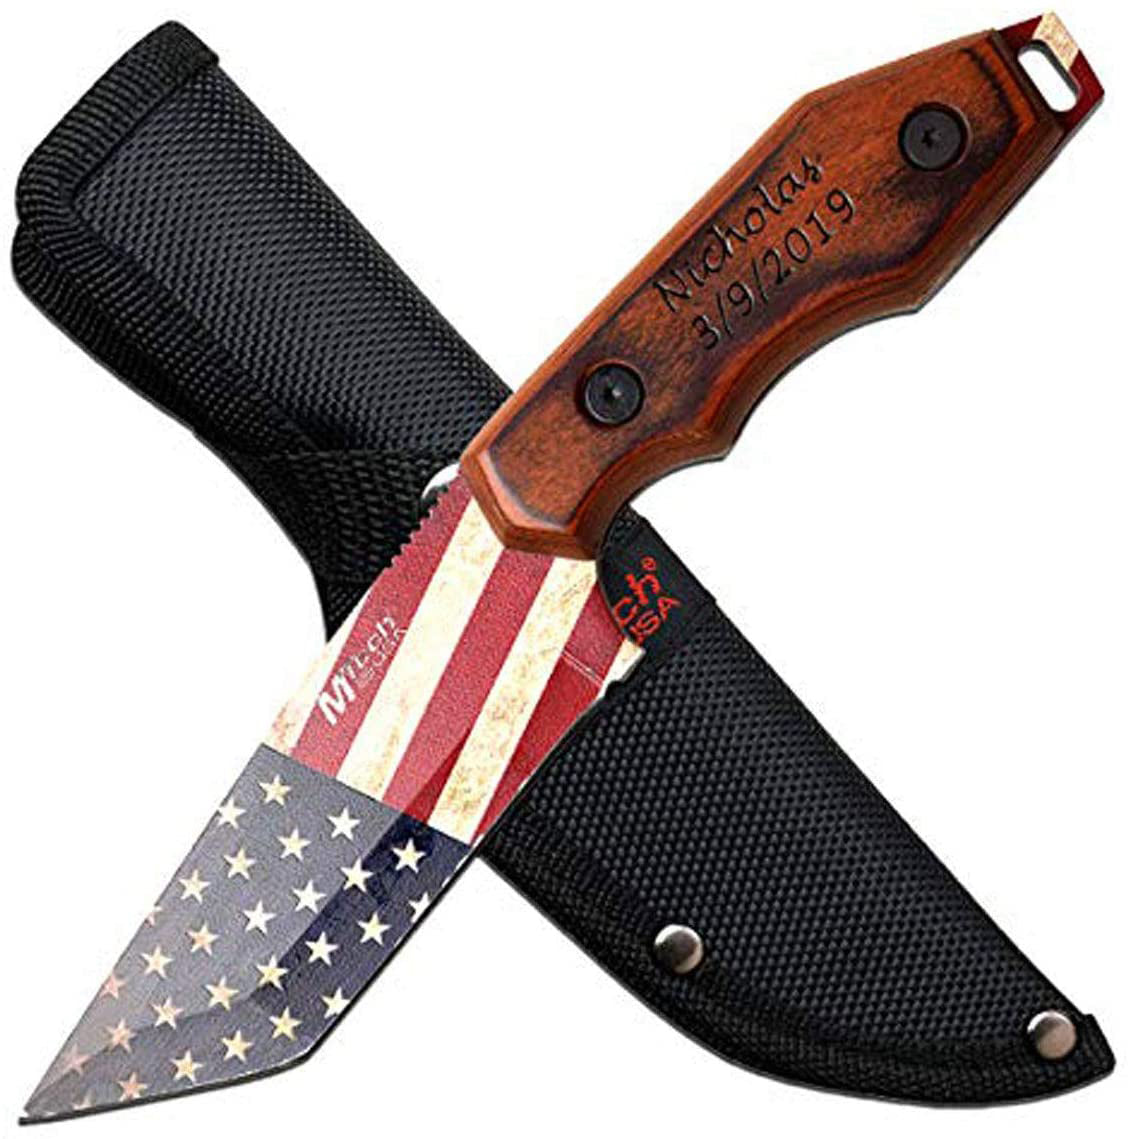 GIFTS INFINITY 8.25 Overall Personalized Laser Engraved Knife, USA Flag Printed Stainless Steel Blade